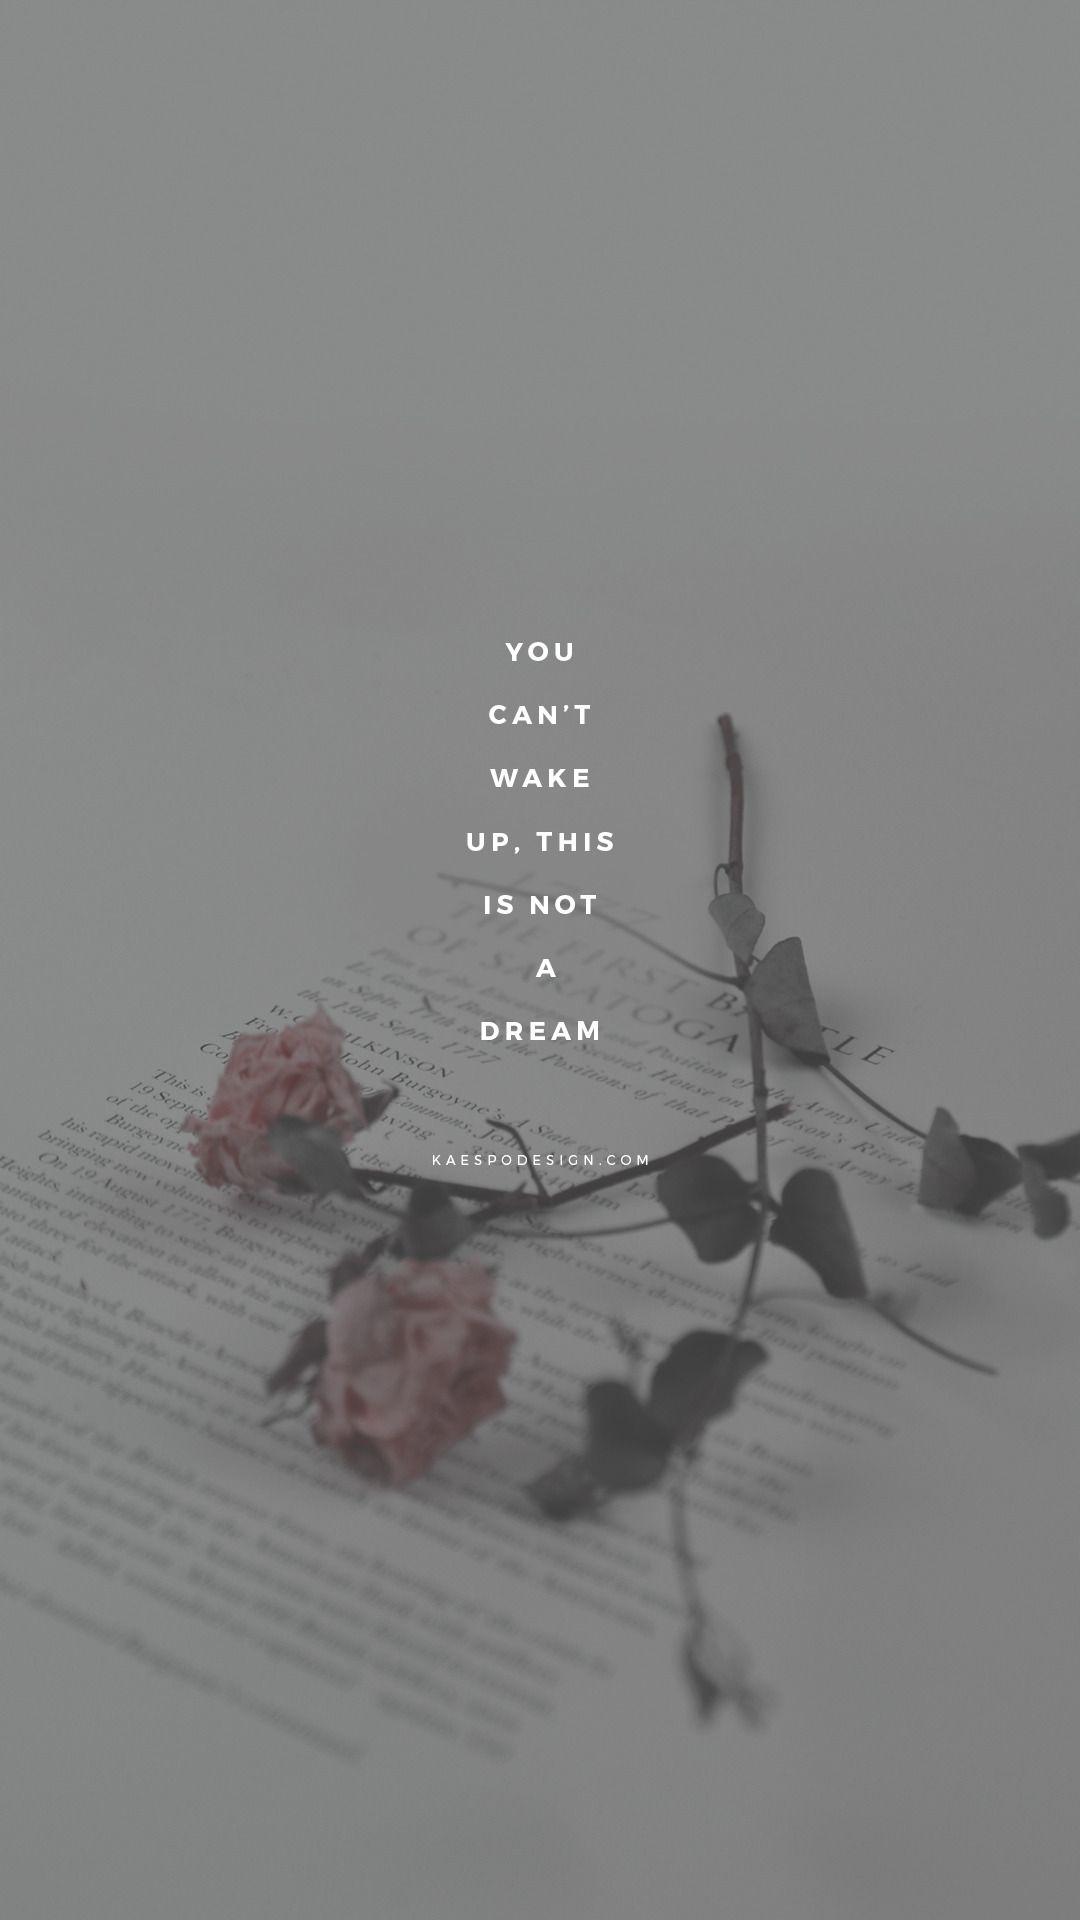 You can't wake up. This is not a dream. iPhone wallpaper - Gray